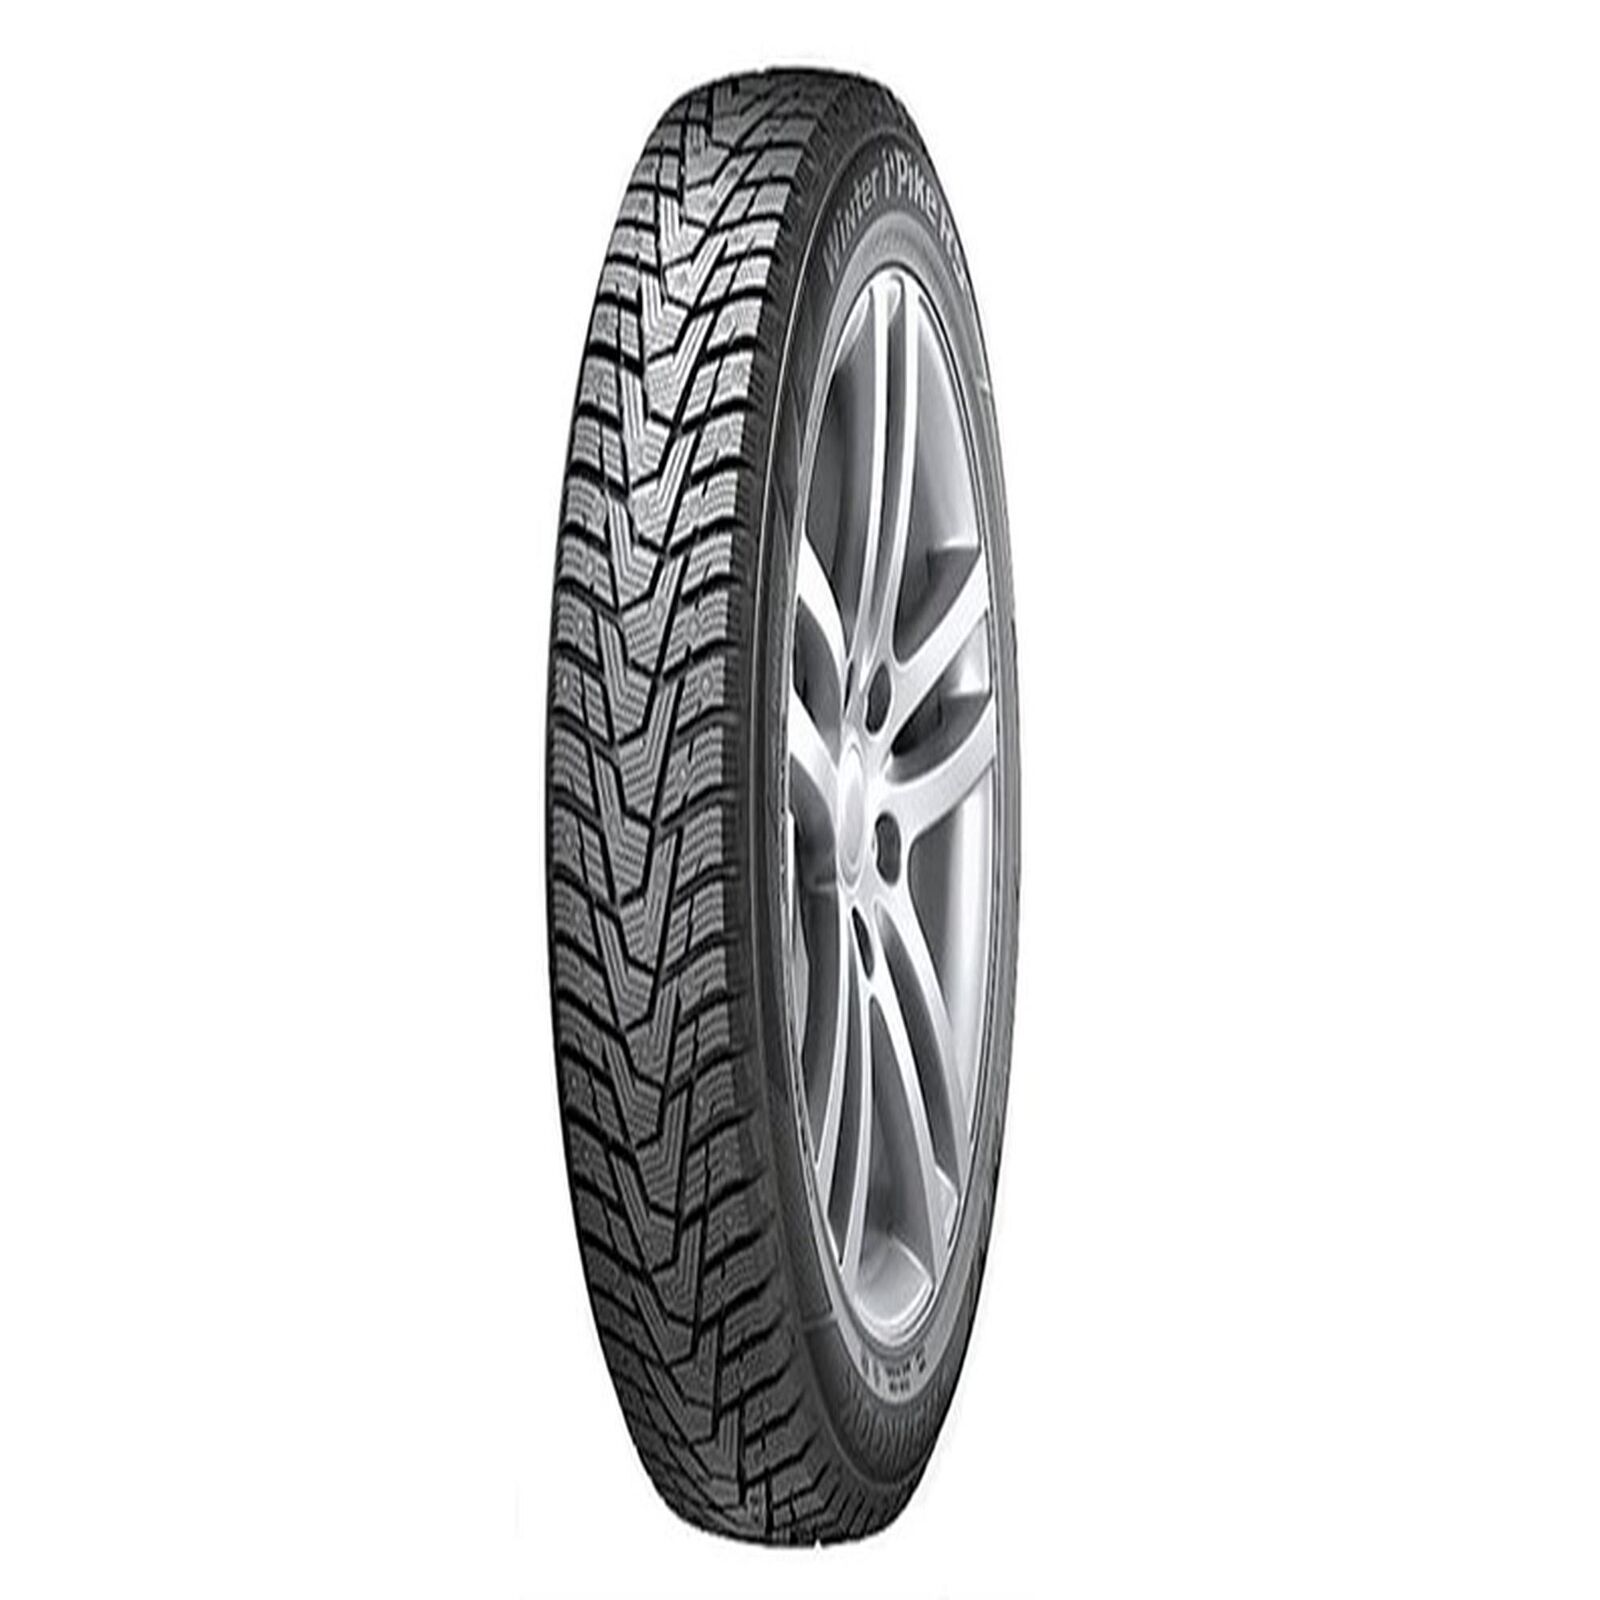 1 Hankook Winter I*pike Rs2 (w429) Studded  - 195/65r15 Tires 1956515 195 65 15